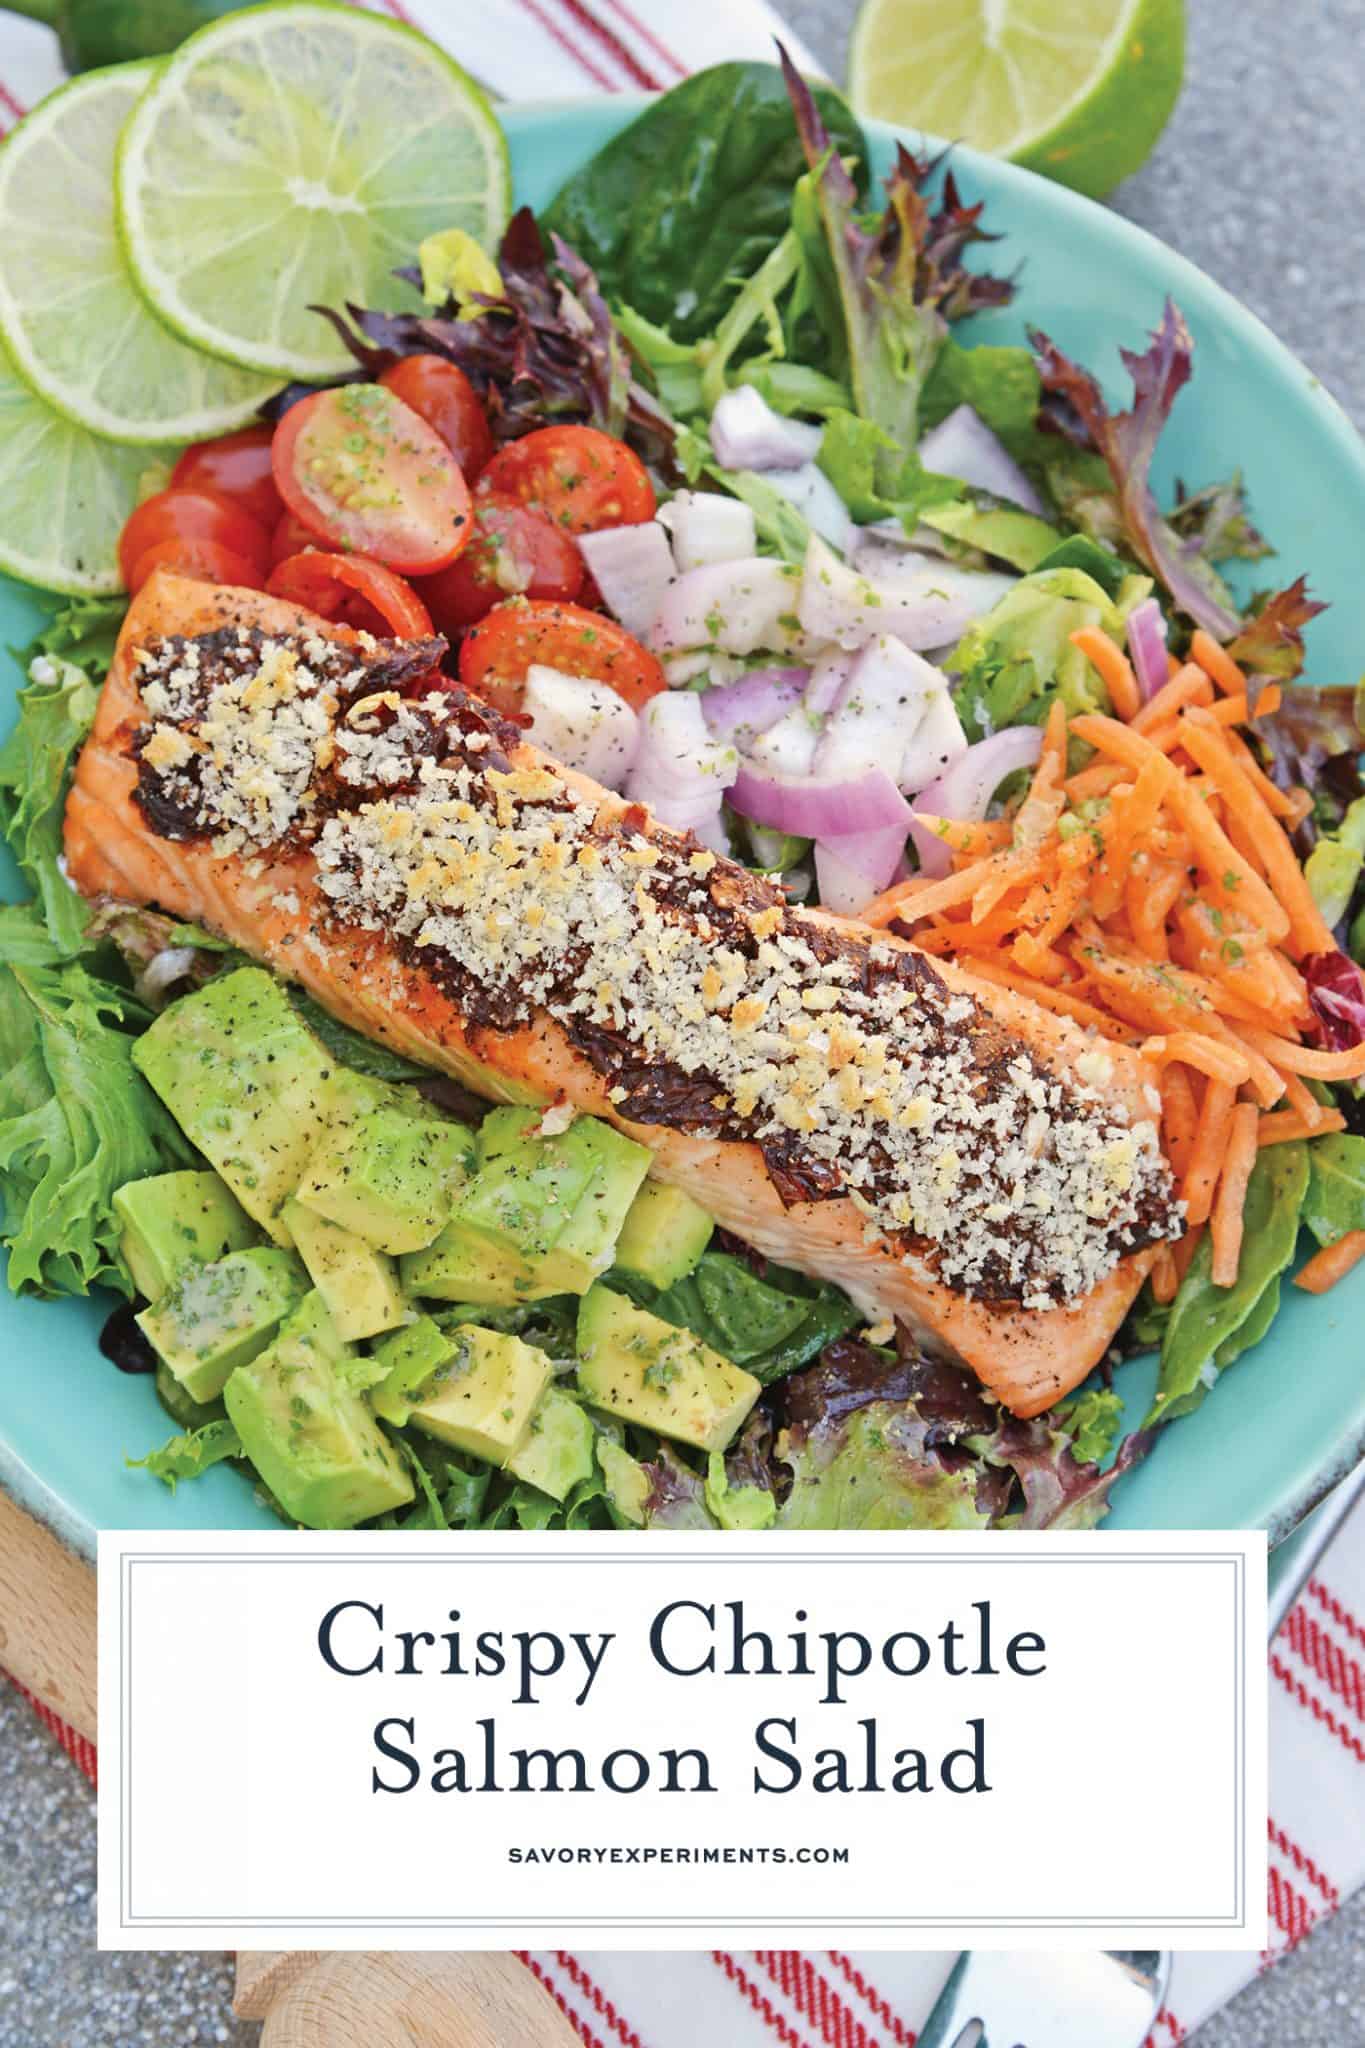 Crispy Chipotle Salmon Salad is a simple and healthy salad filled with a fun texture and spicy chipotle peppers. Top with Cilantro Lime Dressing. #salmonsaladrecipe #saladrecipes #bakedsalmonrecipe www.savoryexperiments.com